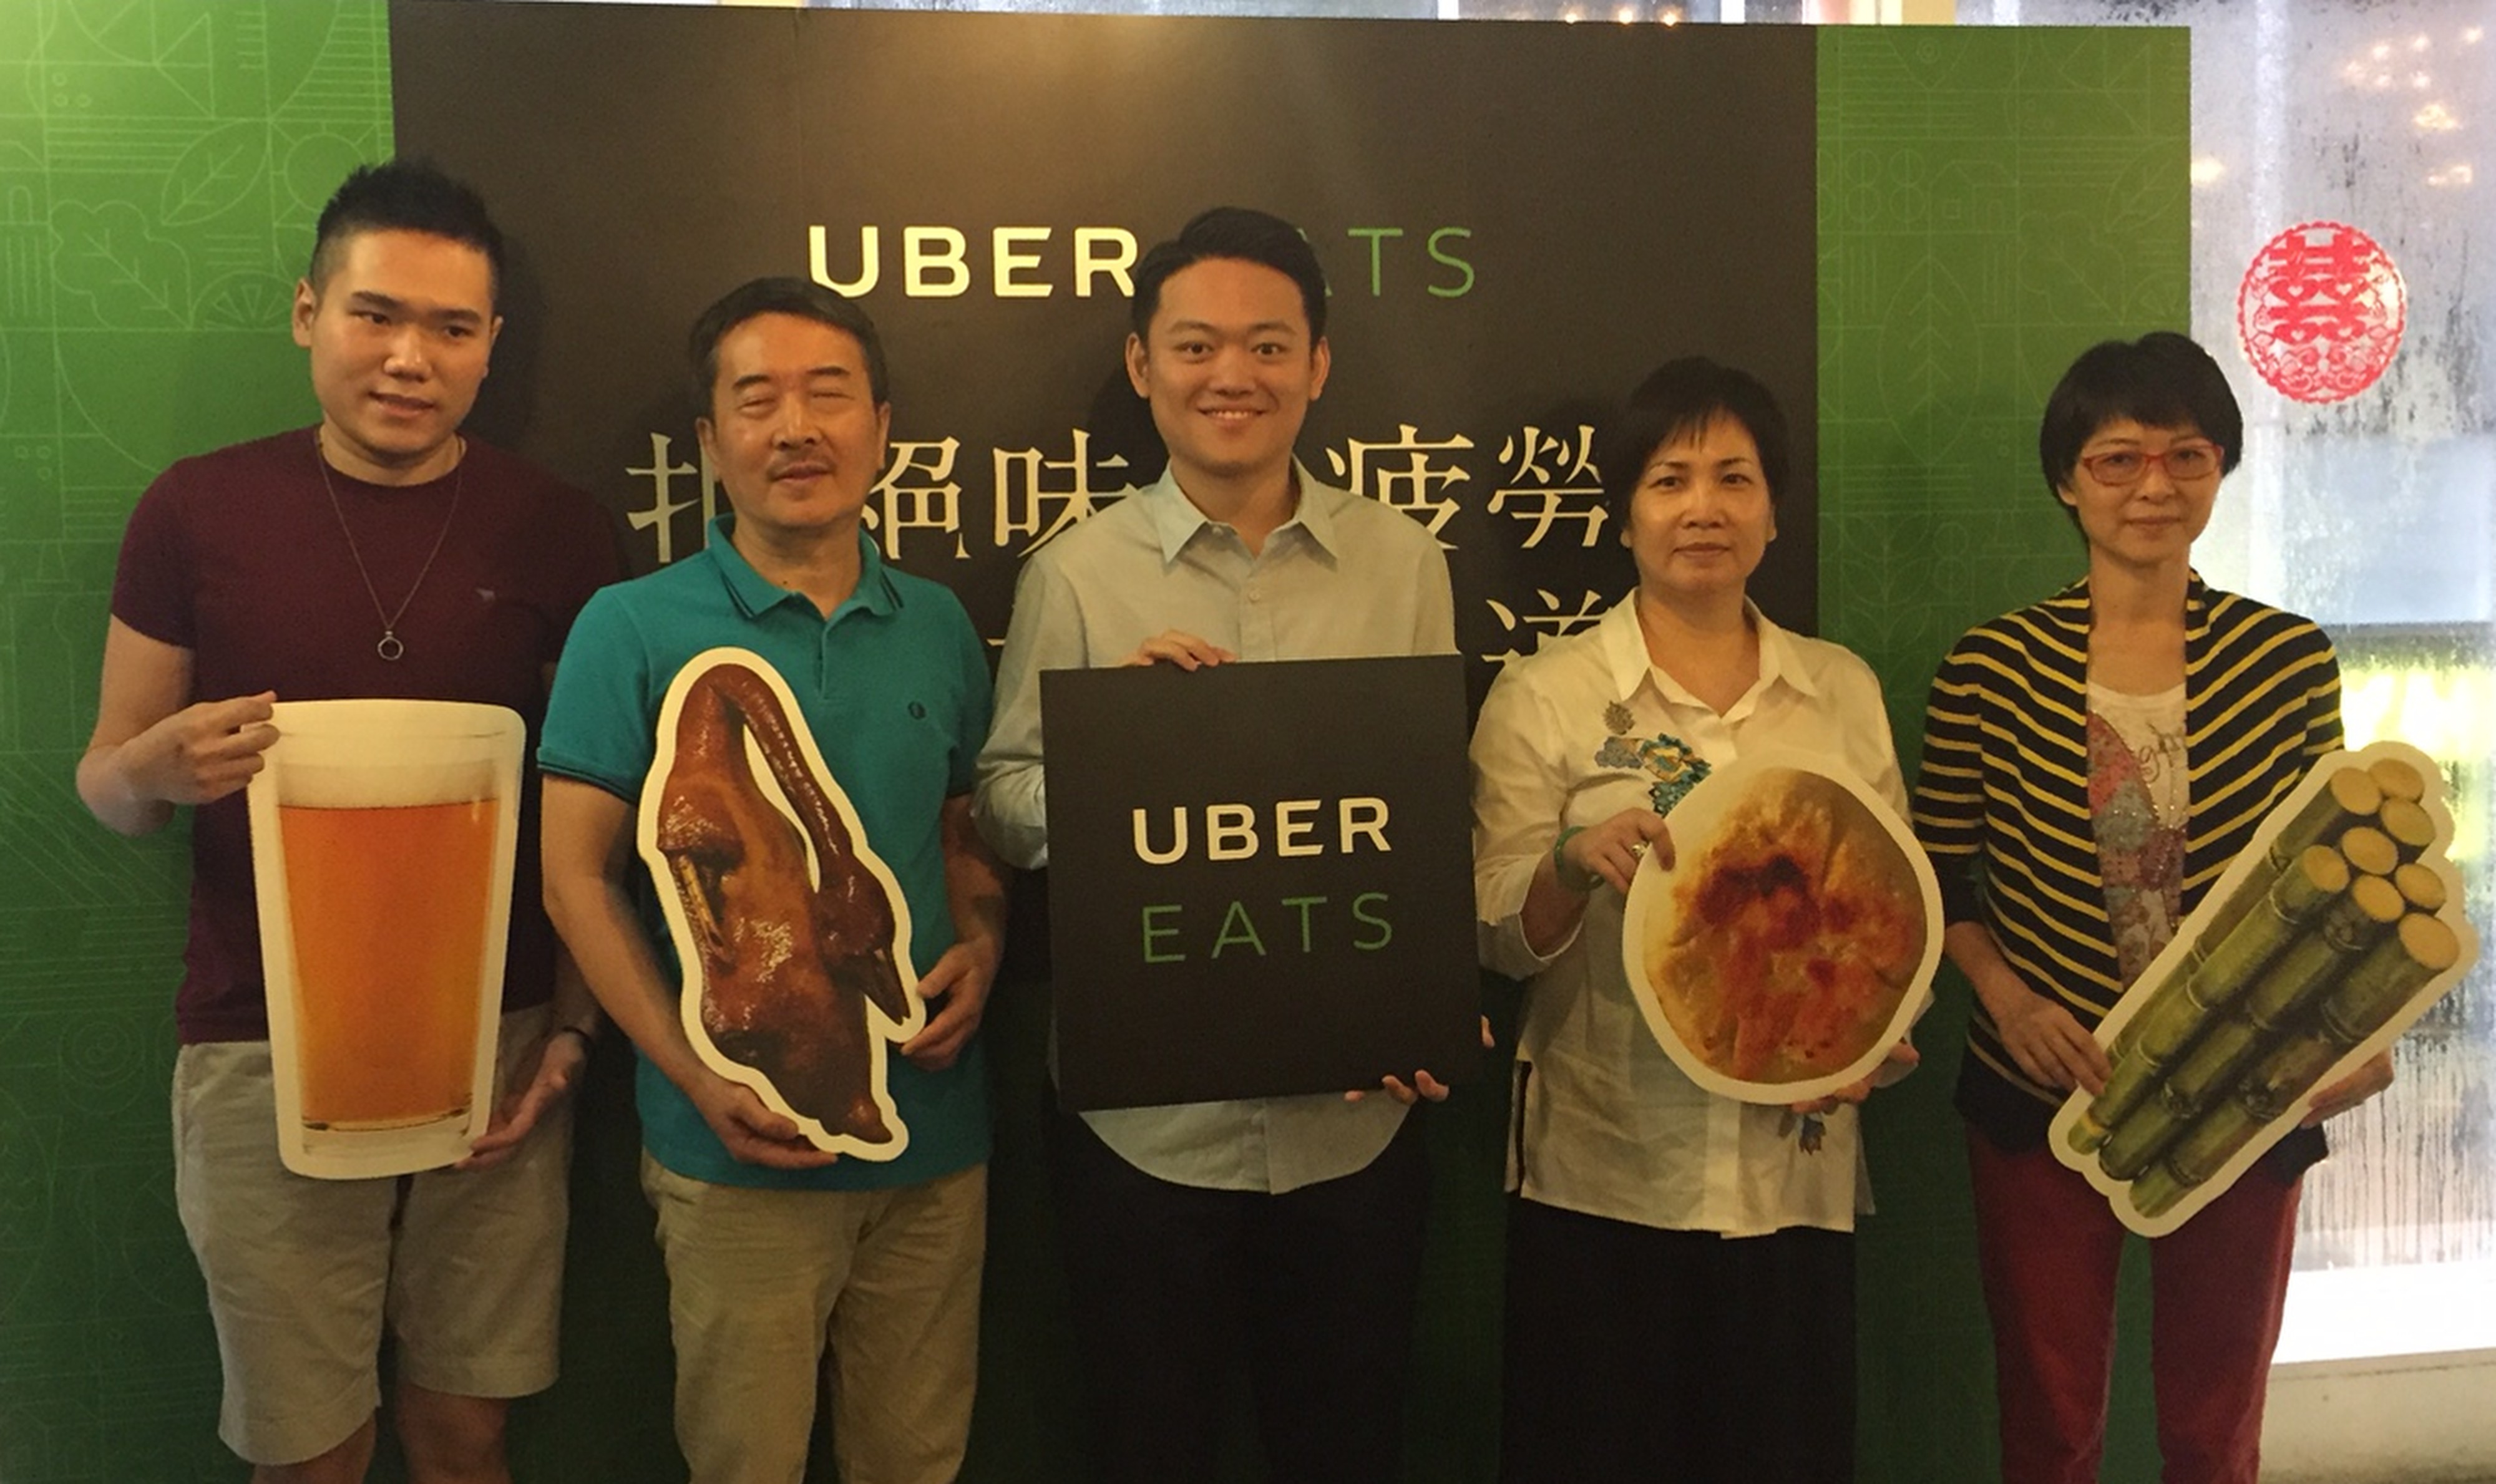 Horace Lam, general manager of UberEats (centre), surrounded by local food vendors who have signed up for the company’s delivery services. Photo: Handout